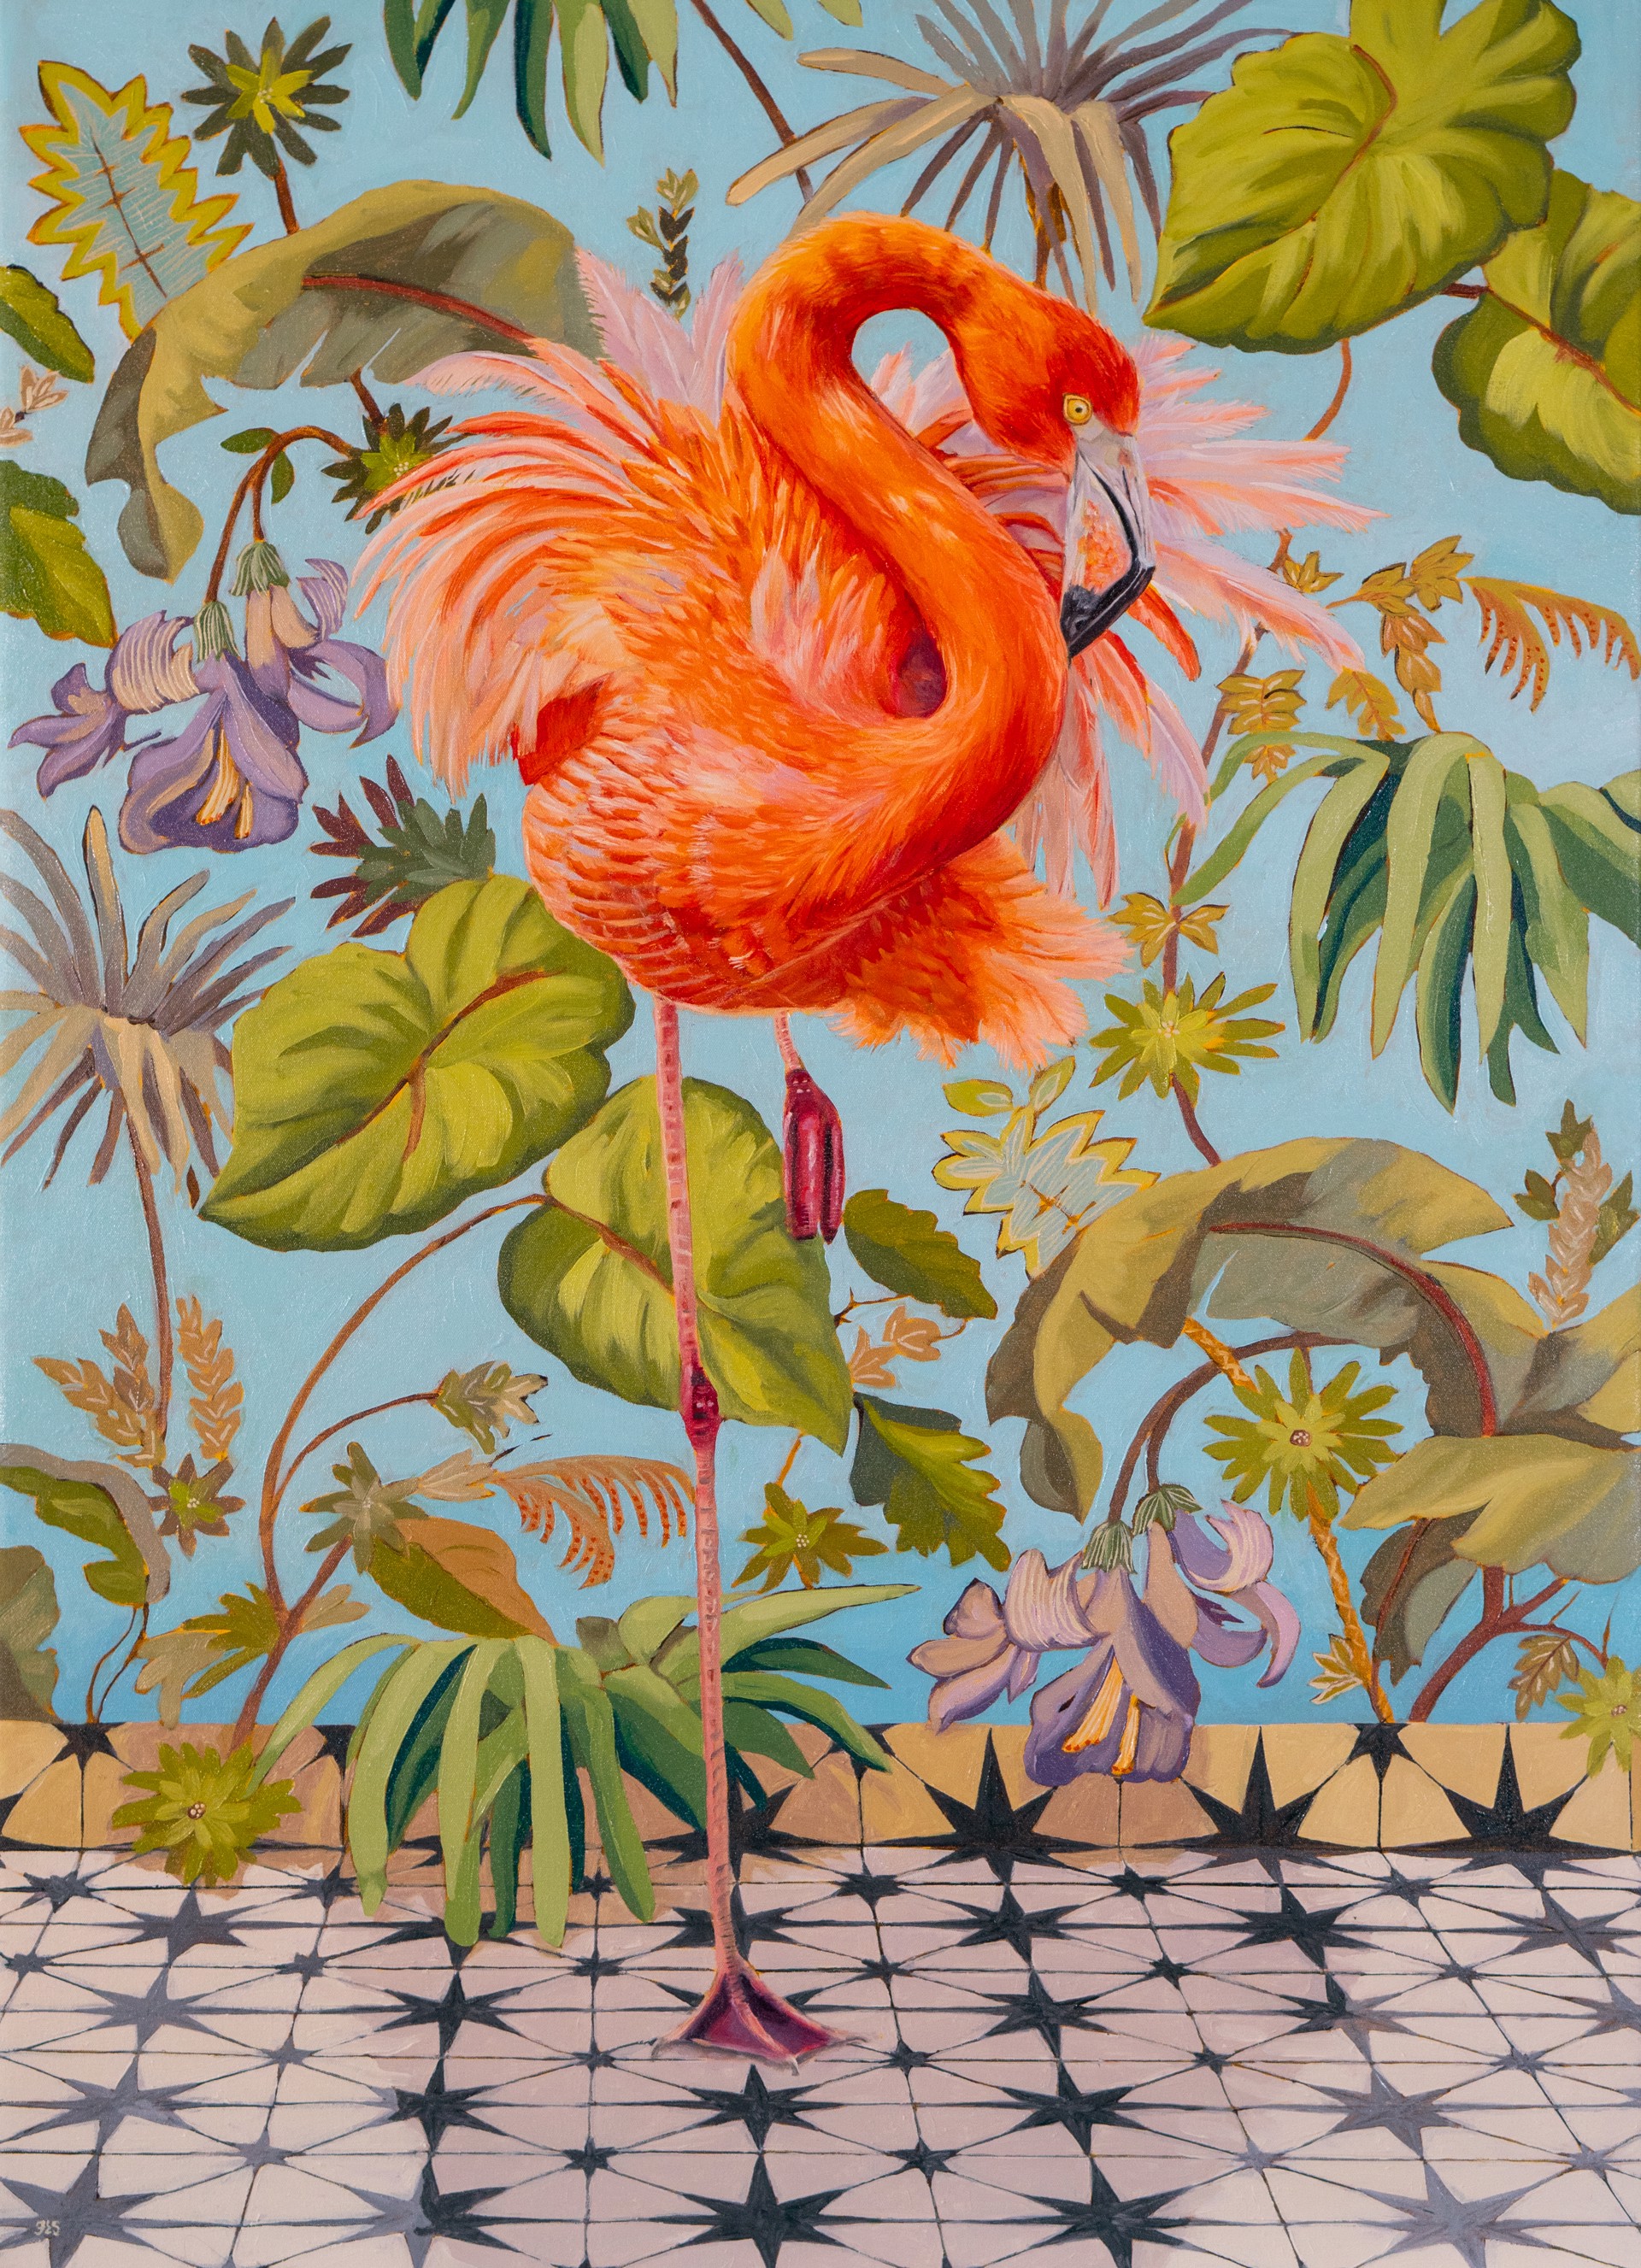 Steppin' Out, Flamingo by Fiona Smith